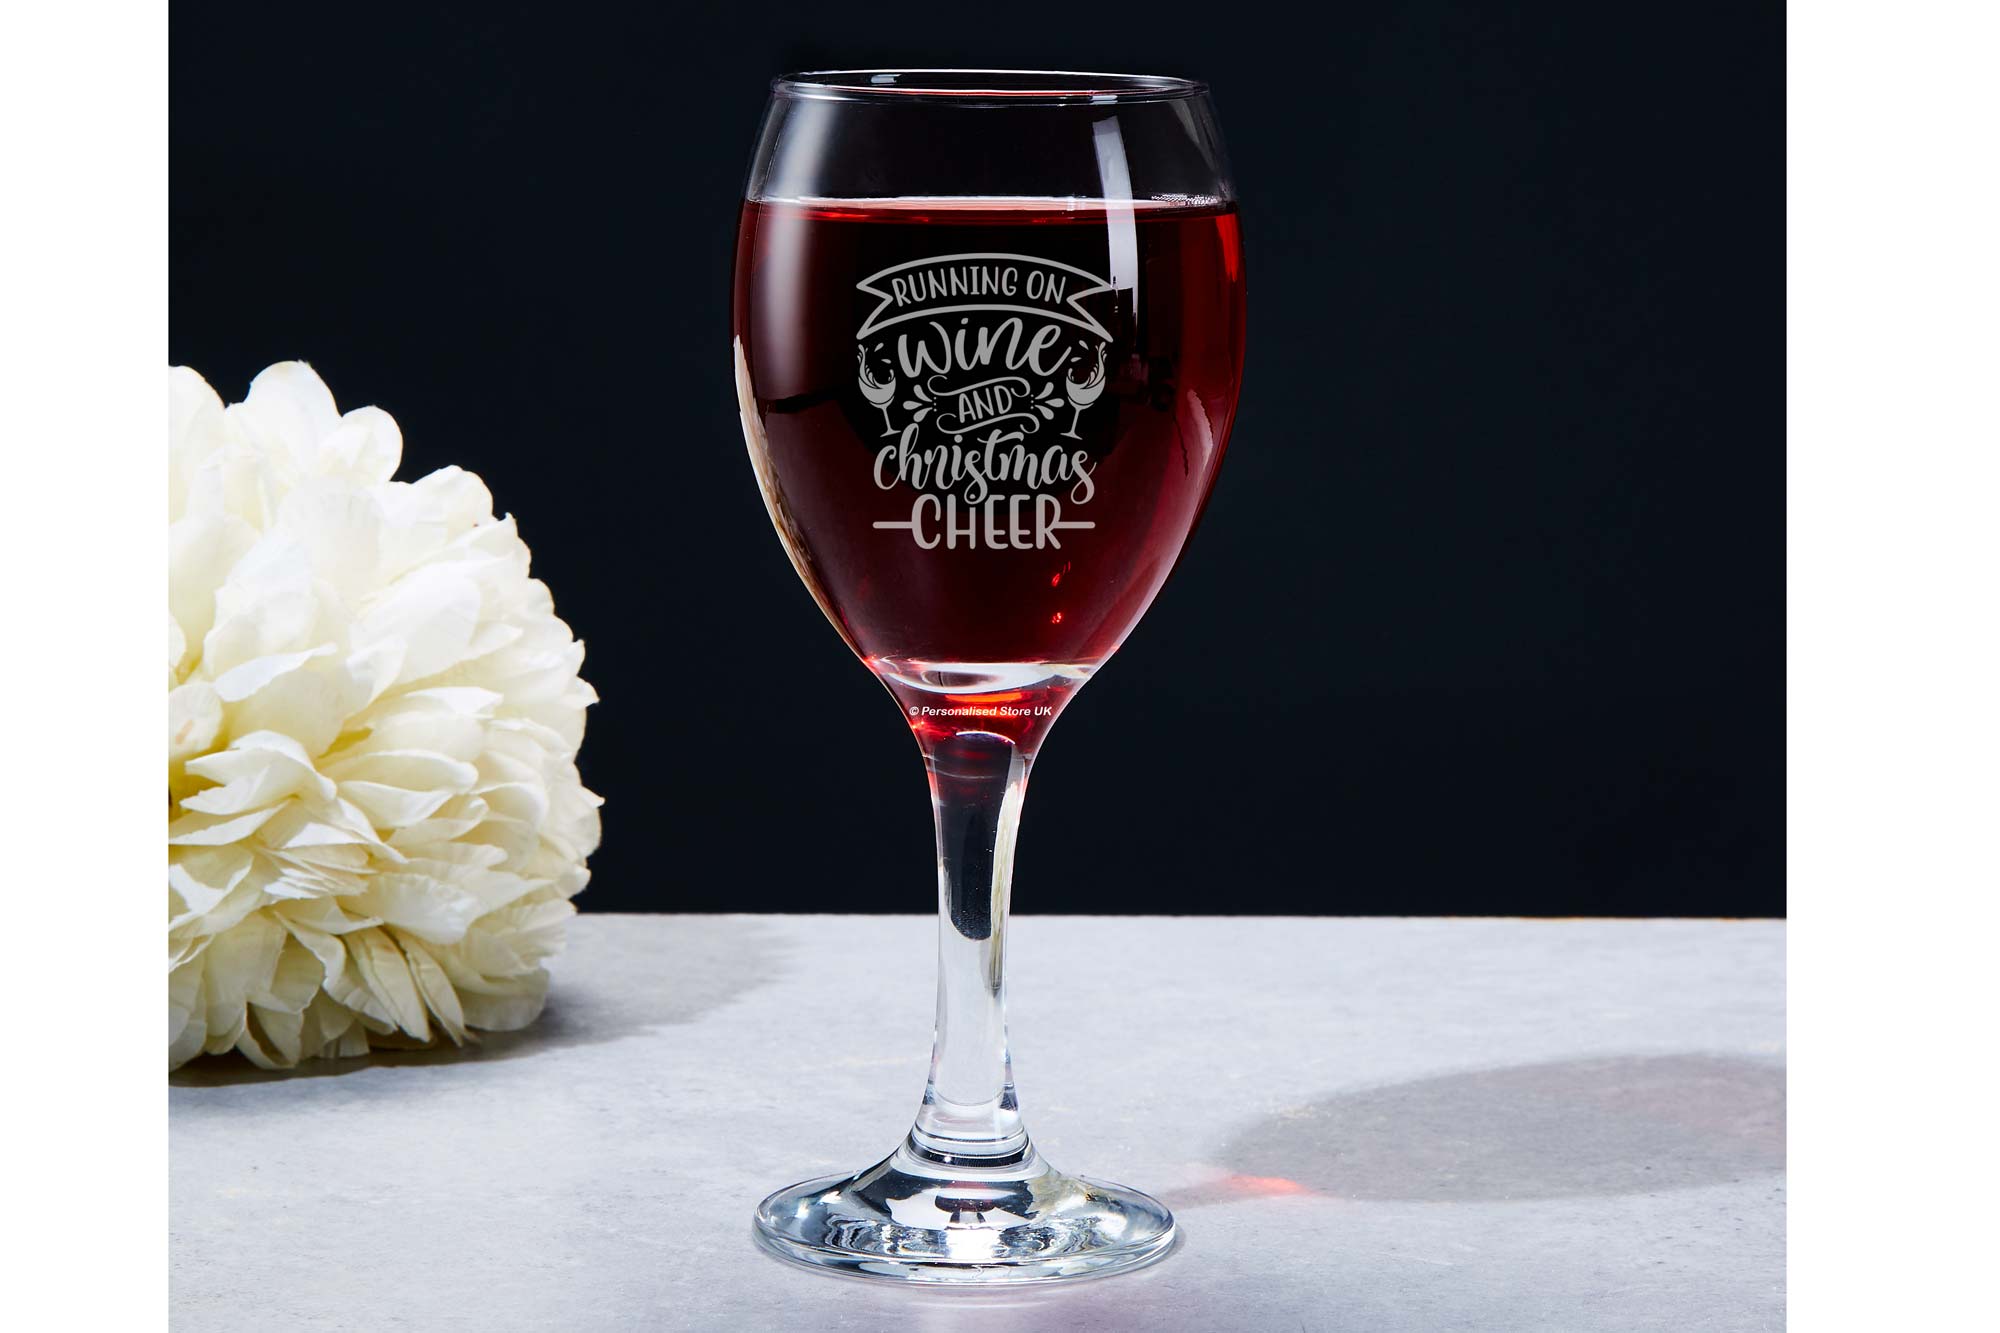 Engraved wine glass for professional Use and Featuring a Beautiful Festive Christmas inspired design. 'Running on Wine and Christmas Cheer' Wine Glass